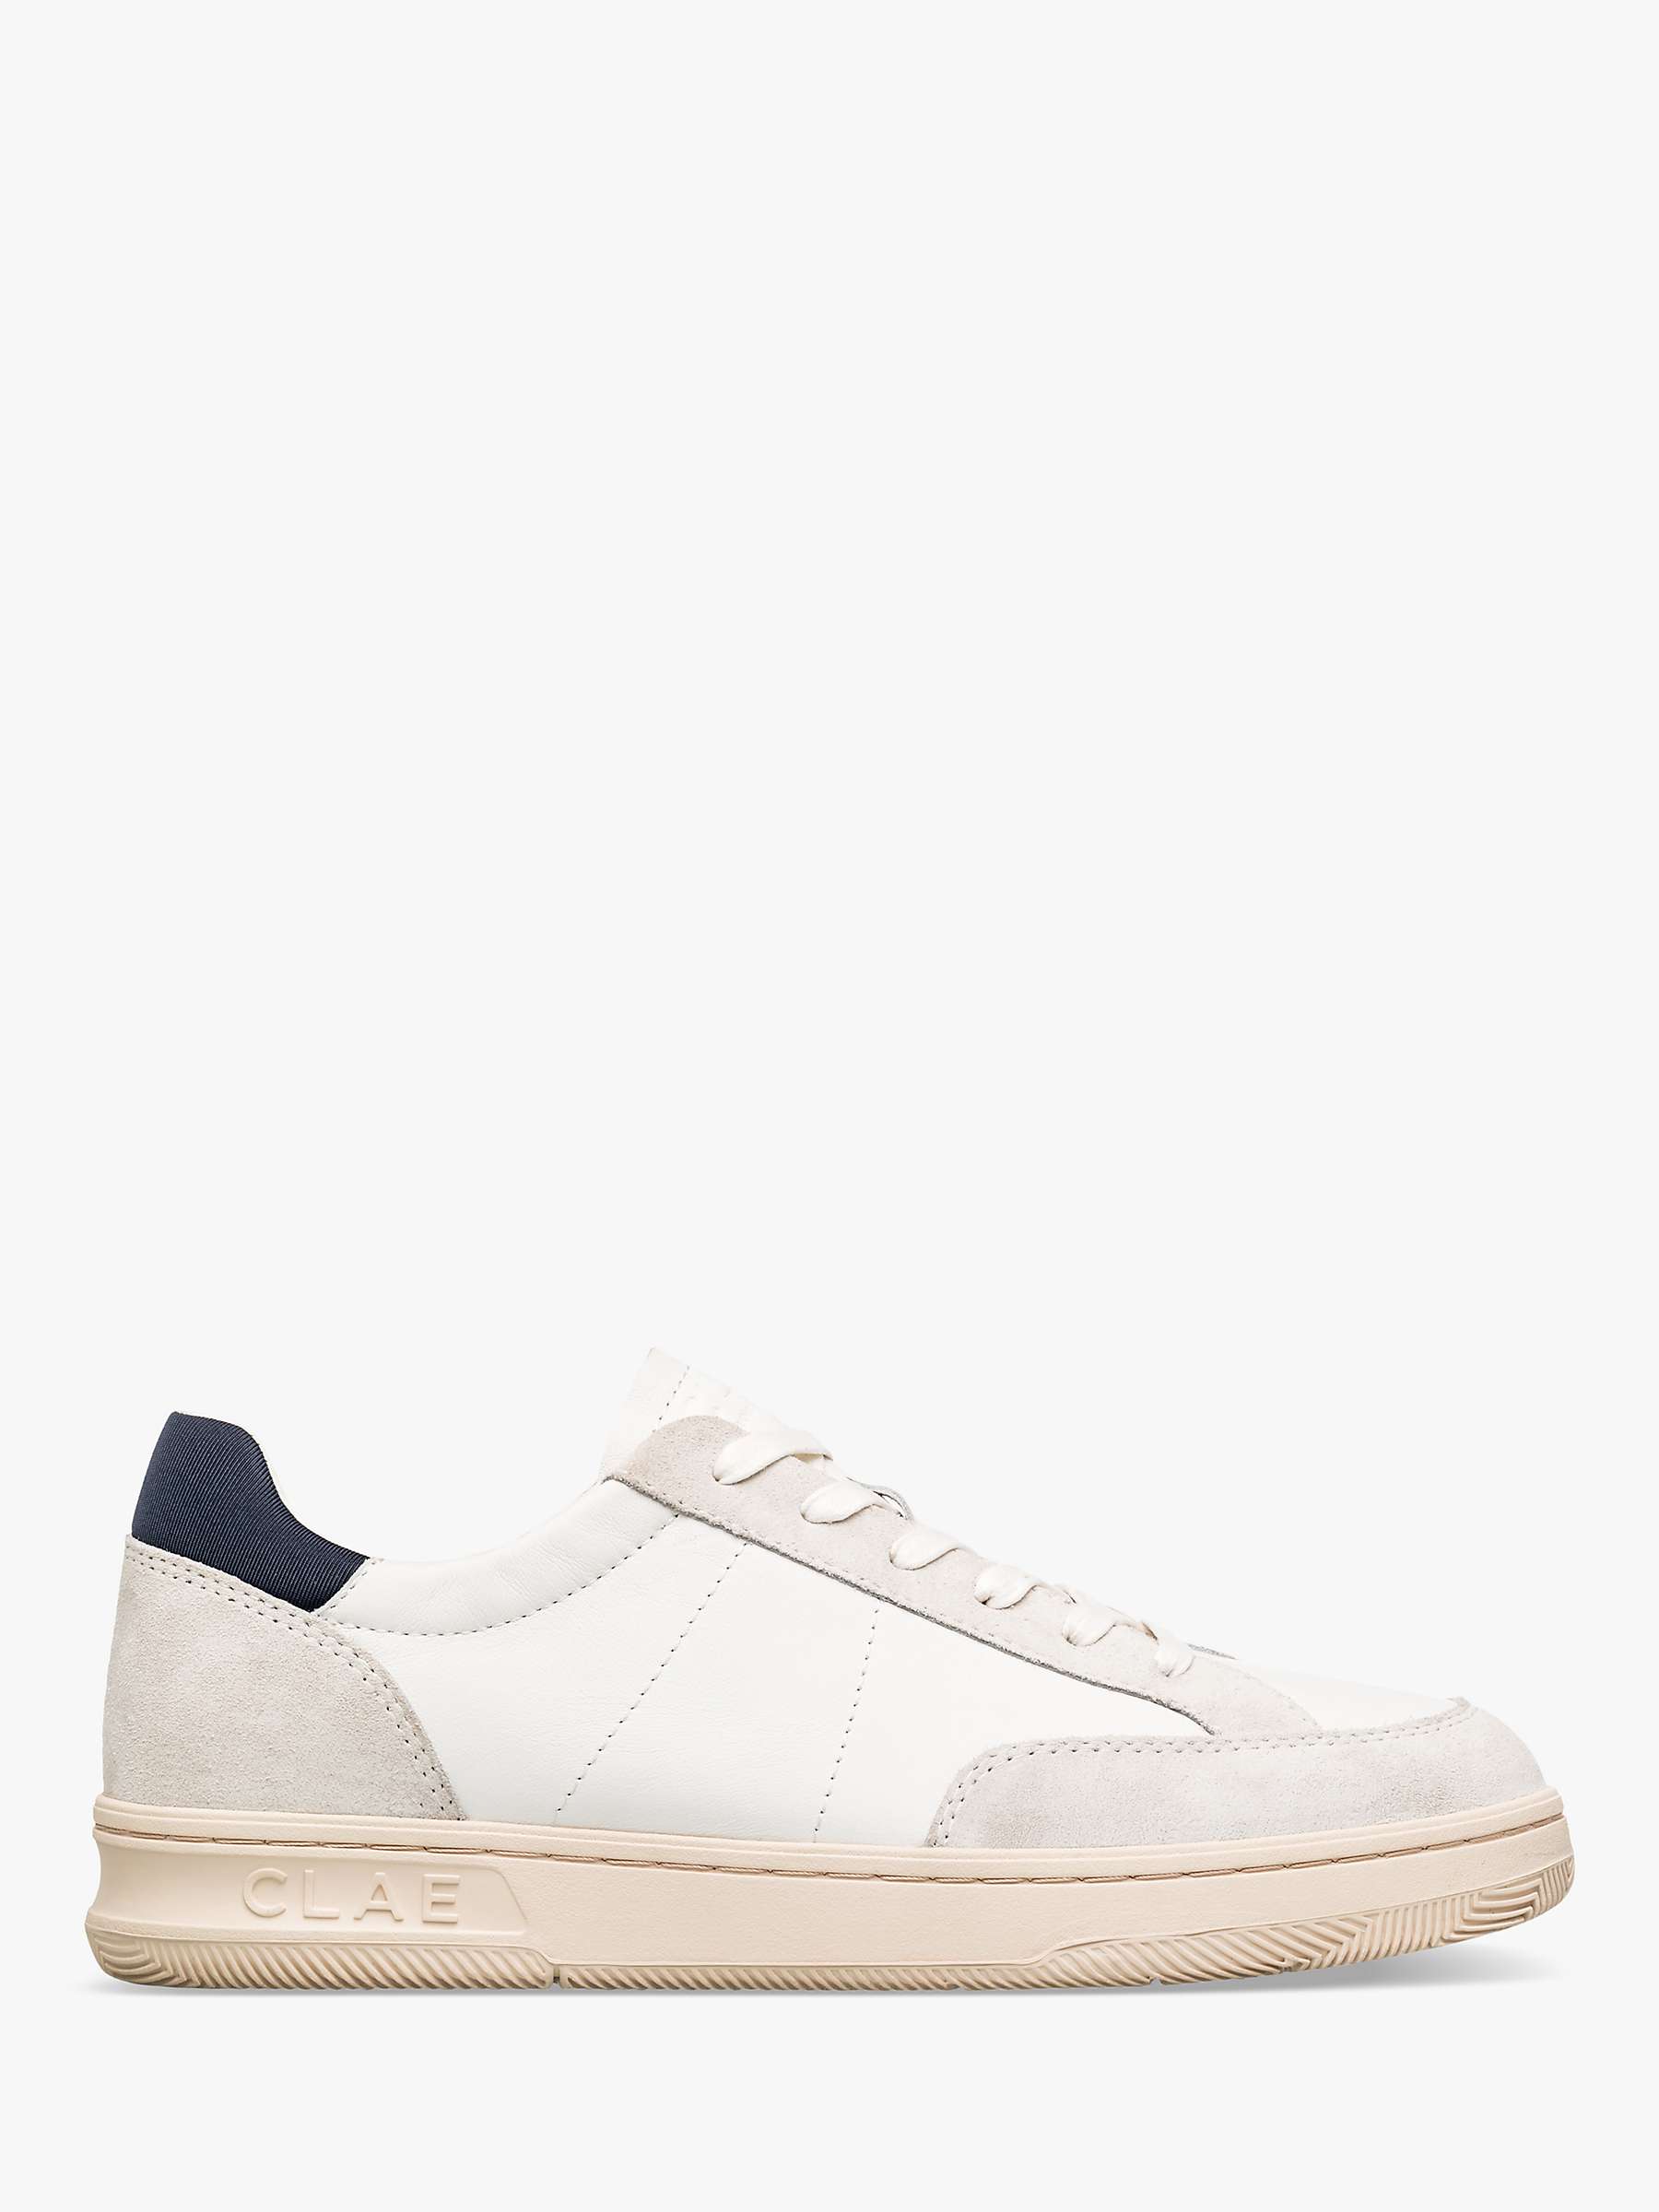 Buy CLAE Monroe Leather Lace Up Trainers Online at johnlewis.com